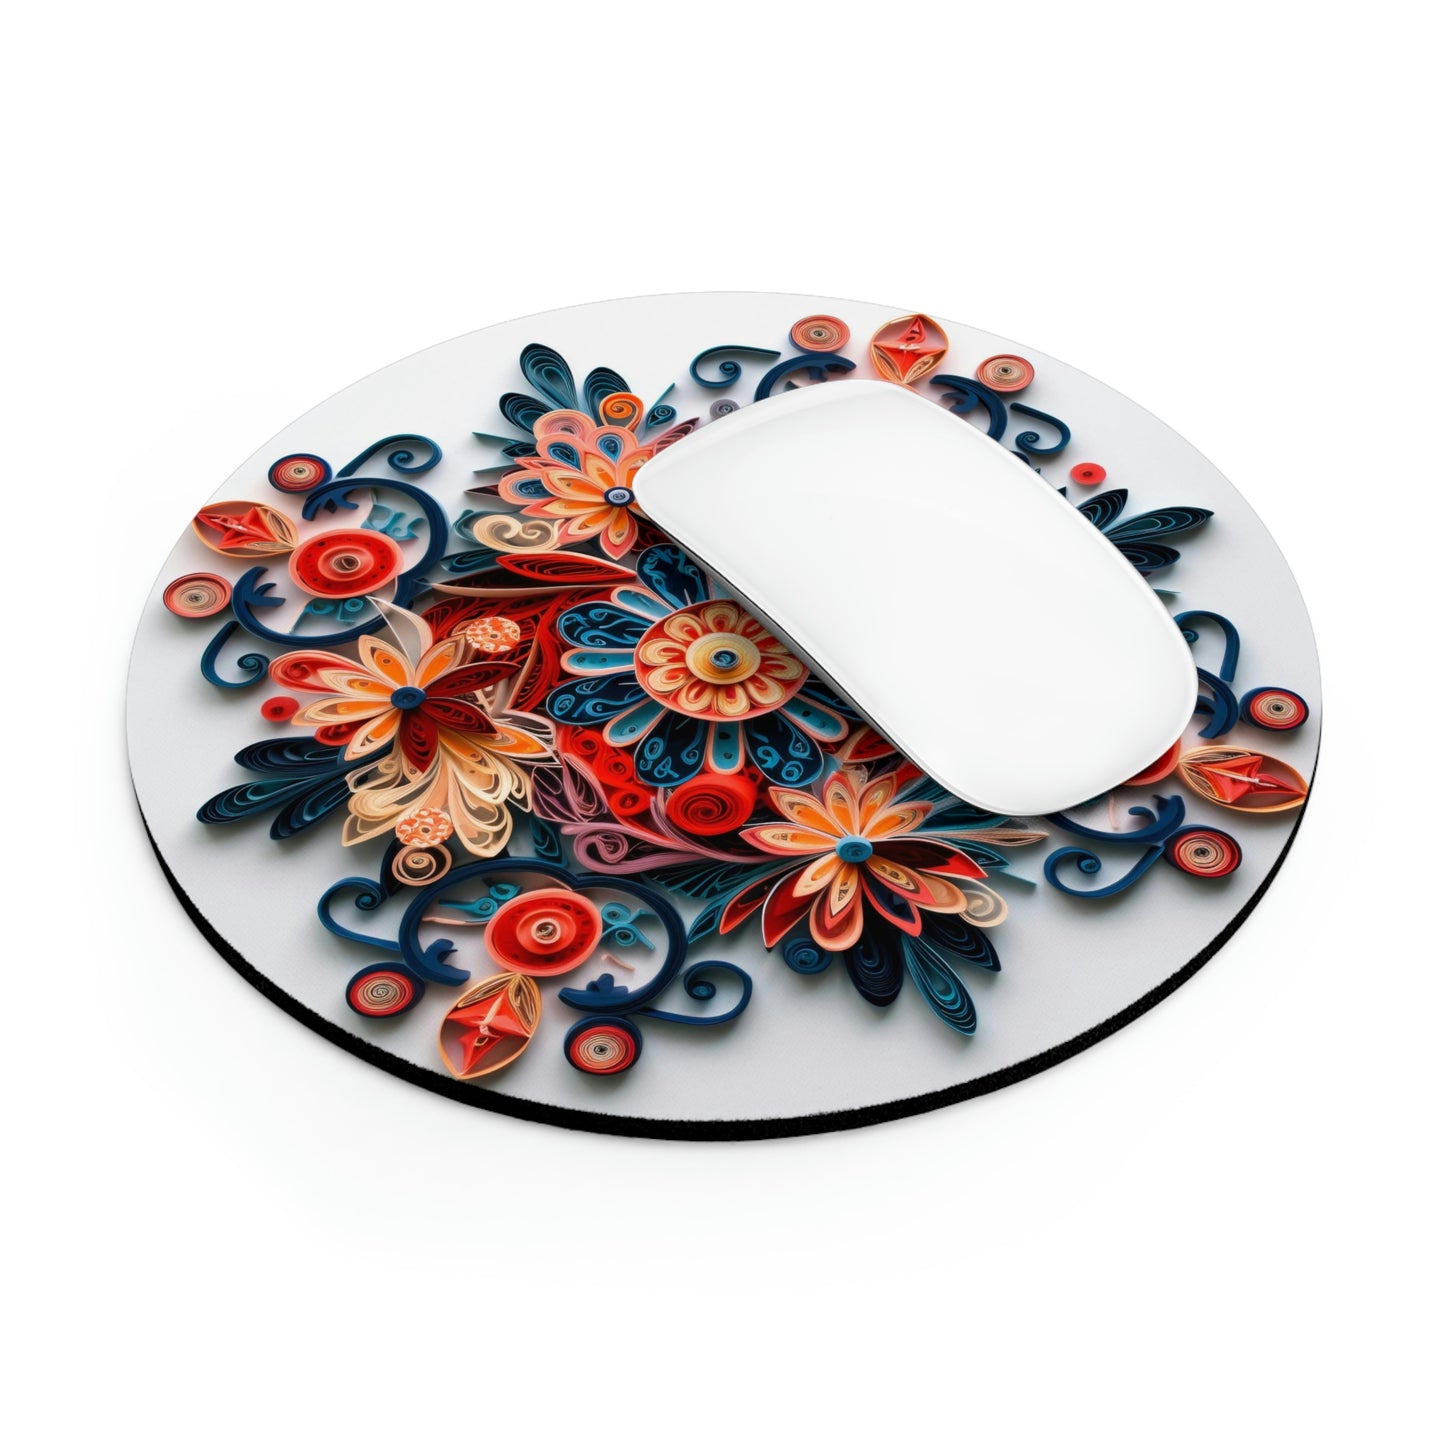 Folk Art Decorative Rosemaling Paper Quilling Mouse Pad (3) 2 Shapes